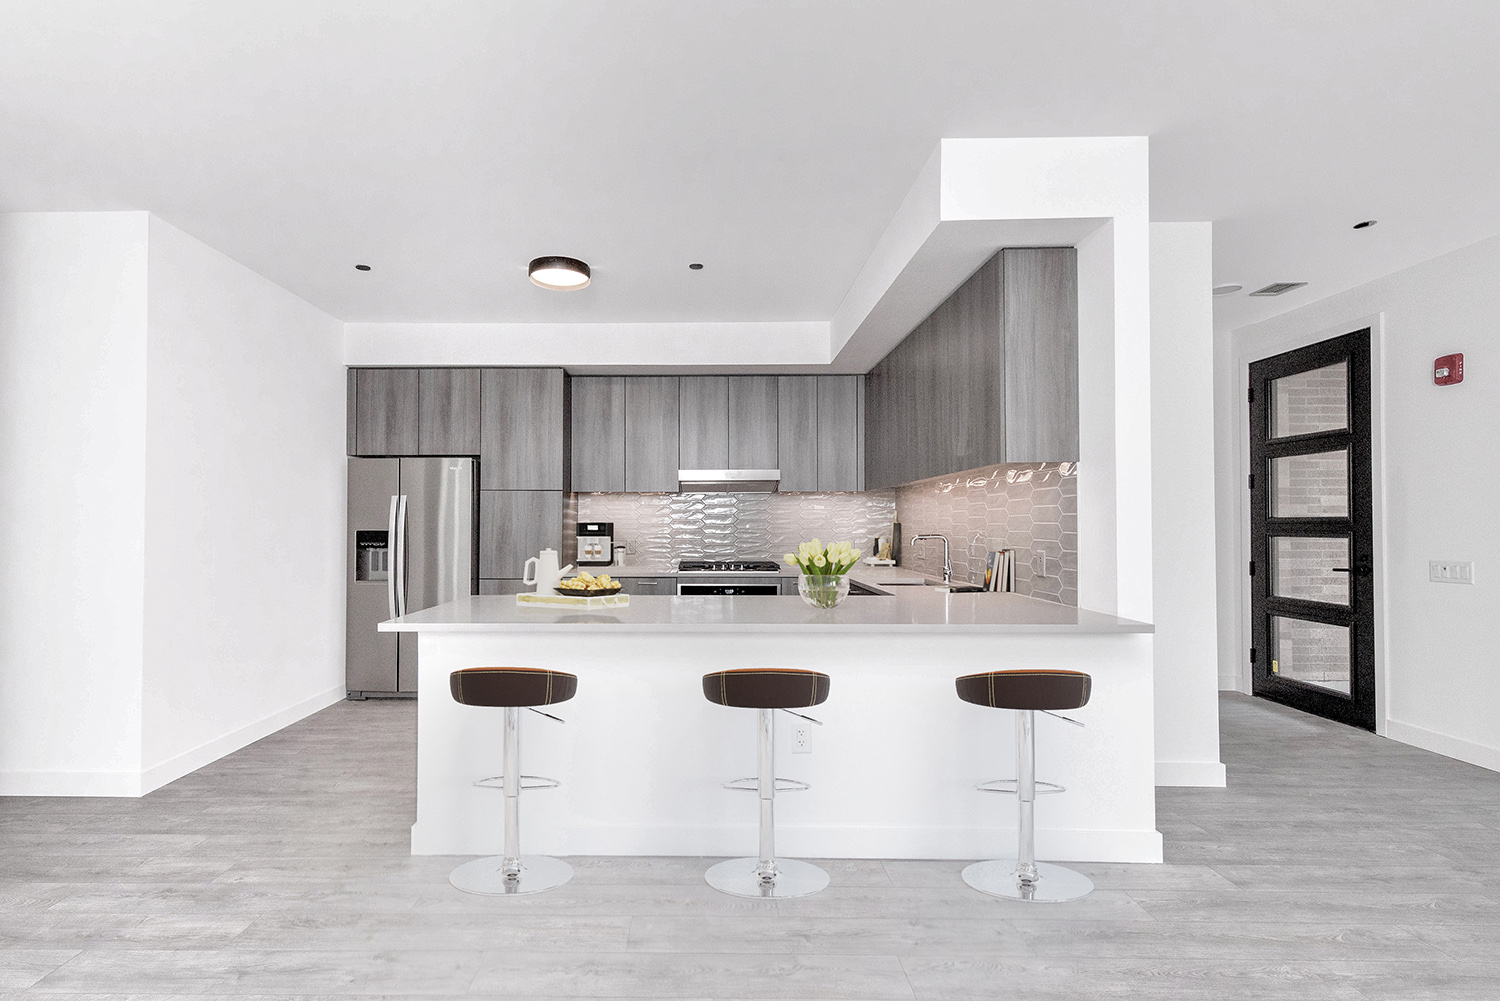 Unit Kitchen at Porte Townhomes. Image by Lendlease and The John Buck Company